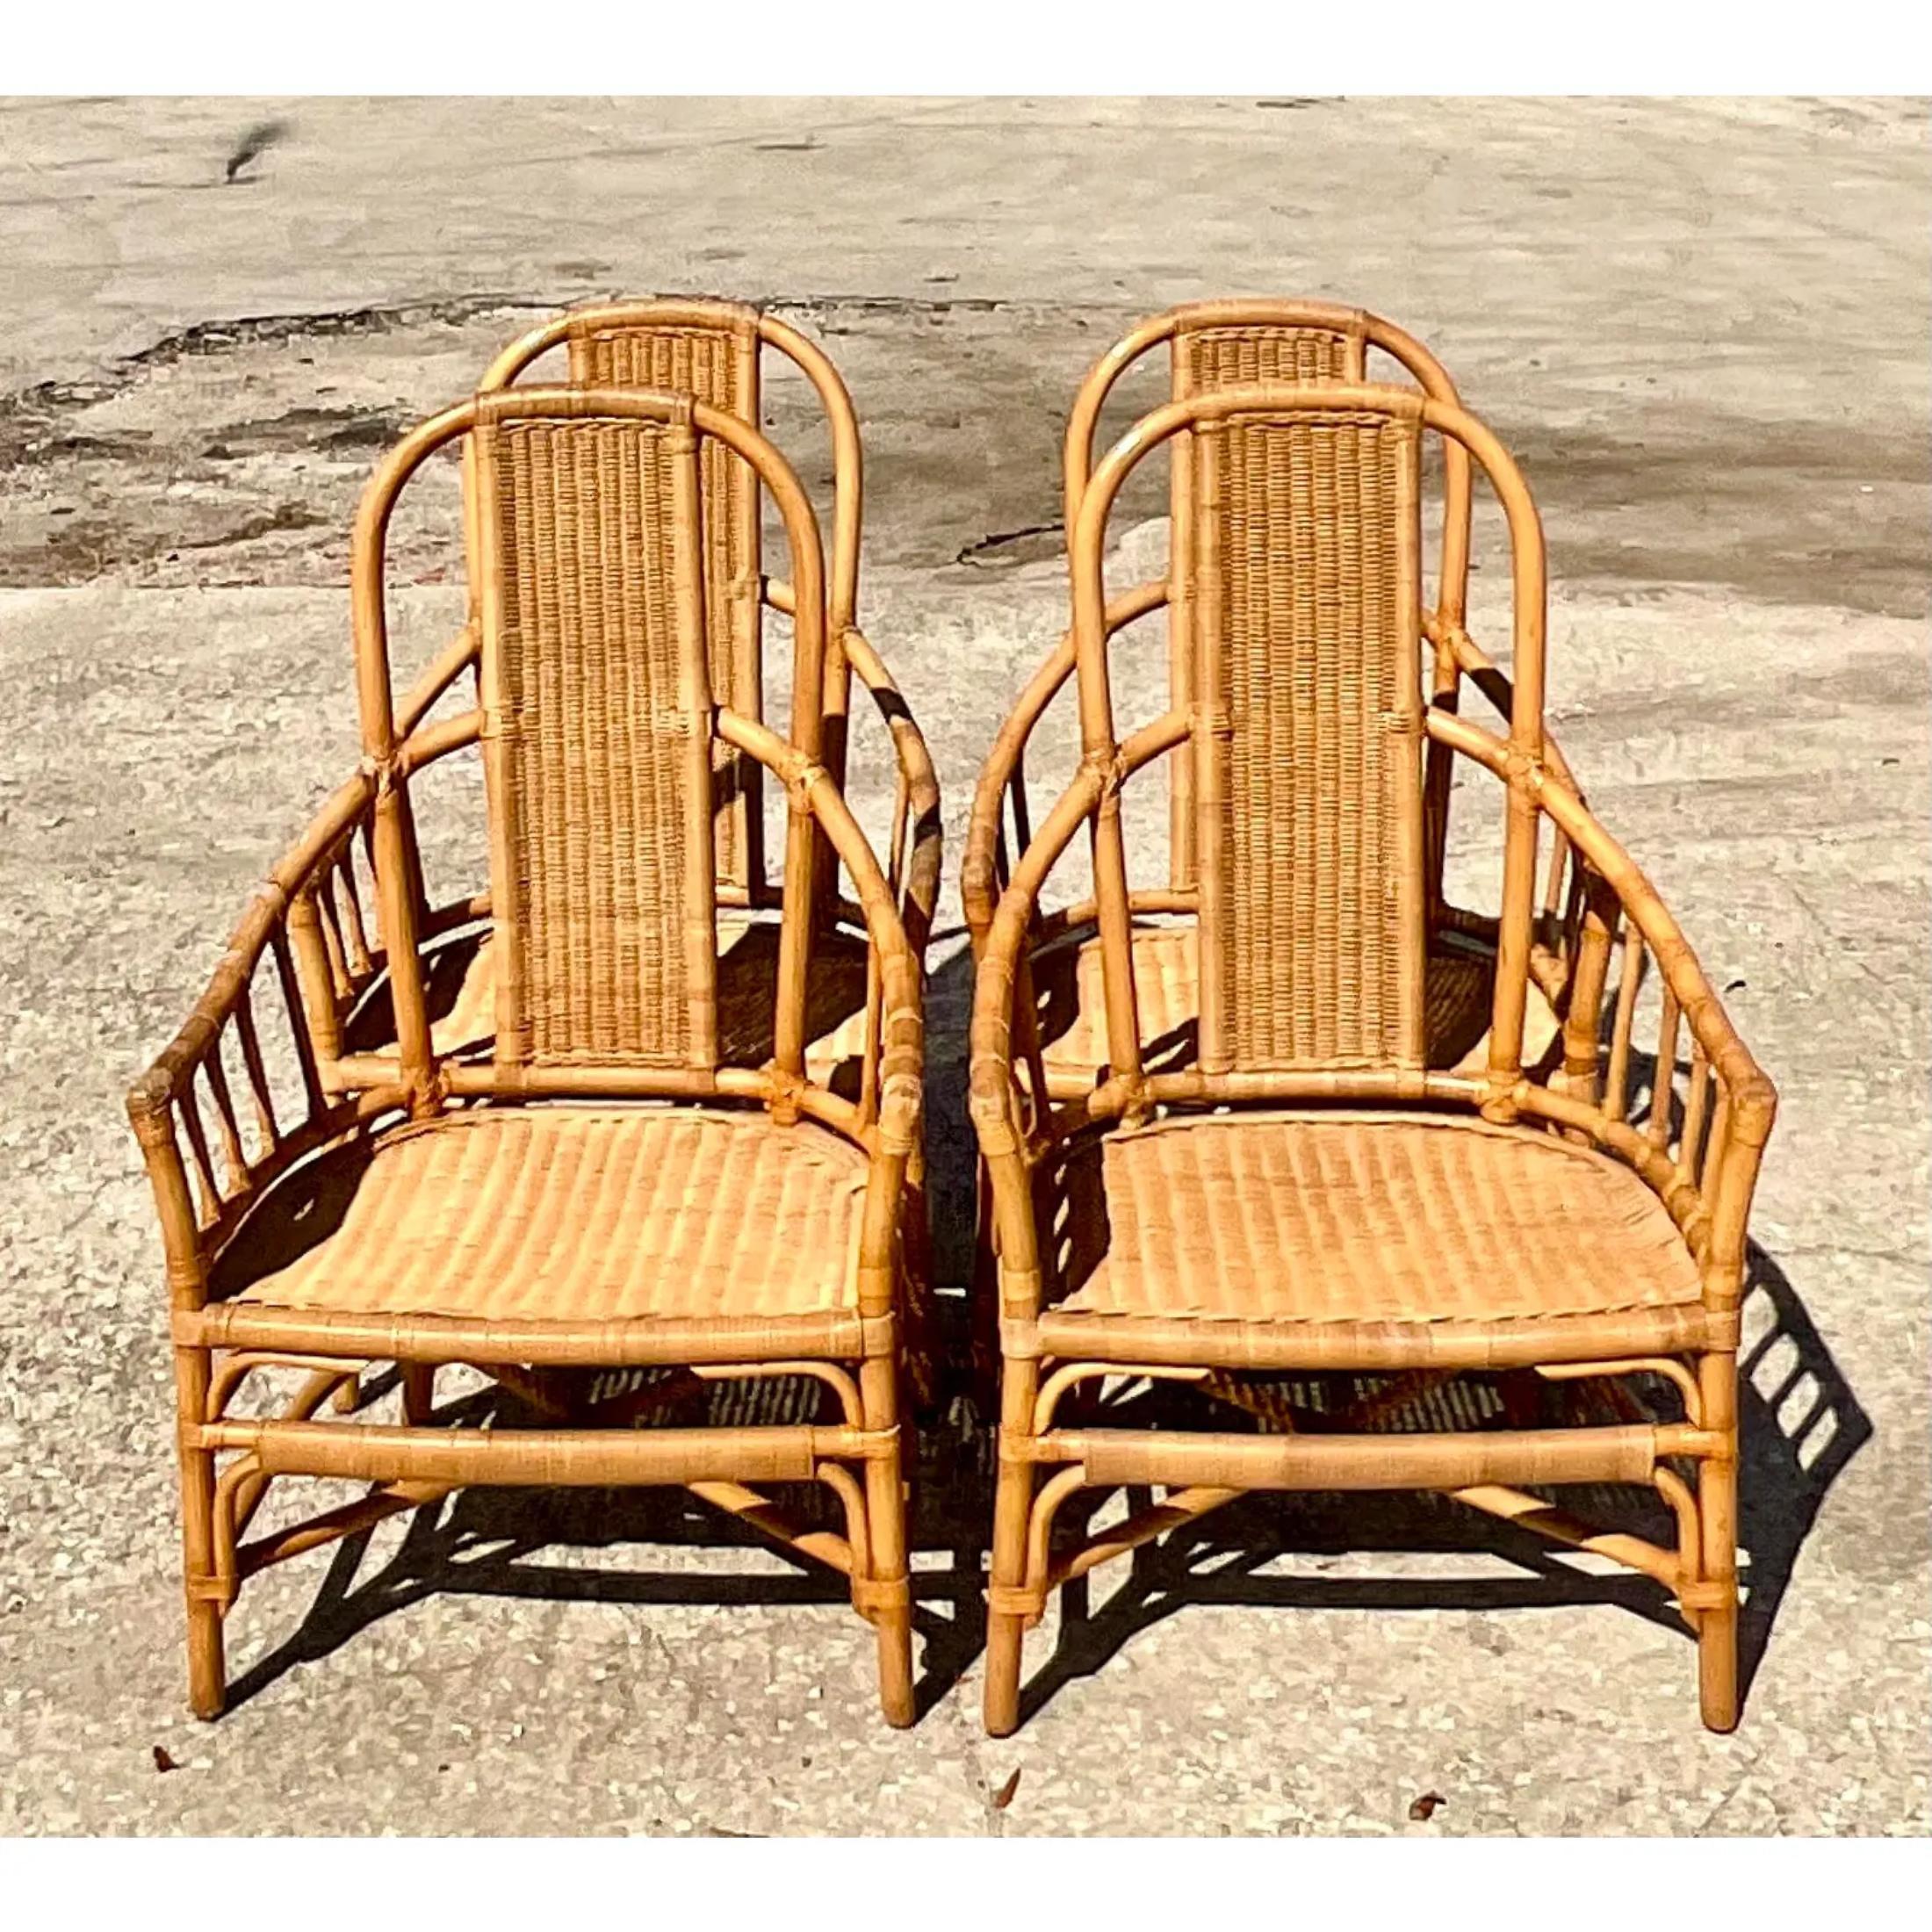 Fantastic set of 4 vintage Coastal dining chairs. Made by the coveted Mark David. Beautiful high arched backs with inset woven panels. Comfy wide seats for maximum relaxing. Acquired from a Palm Beach estate